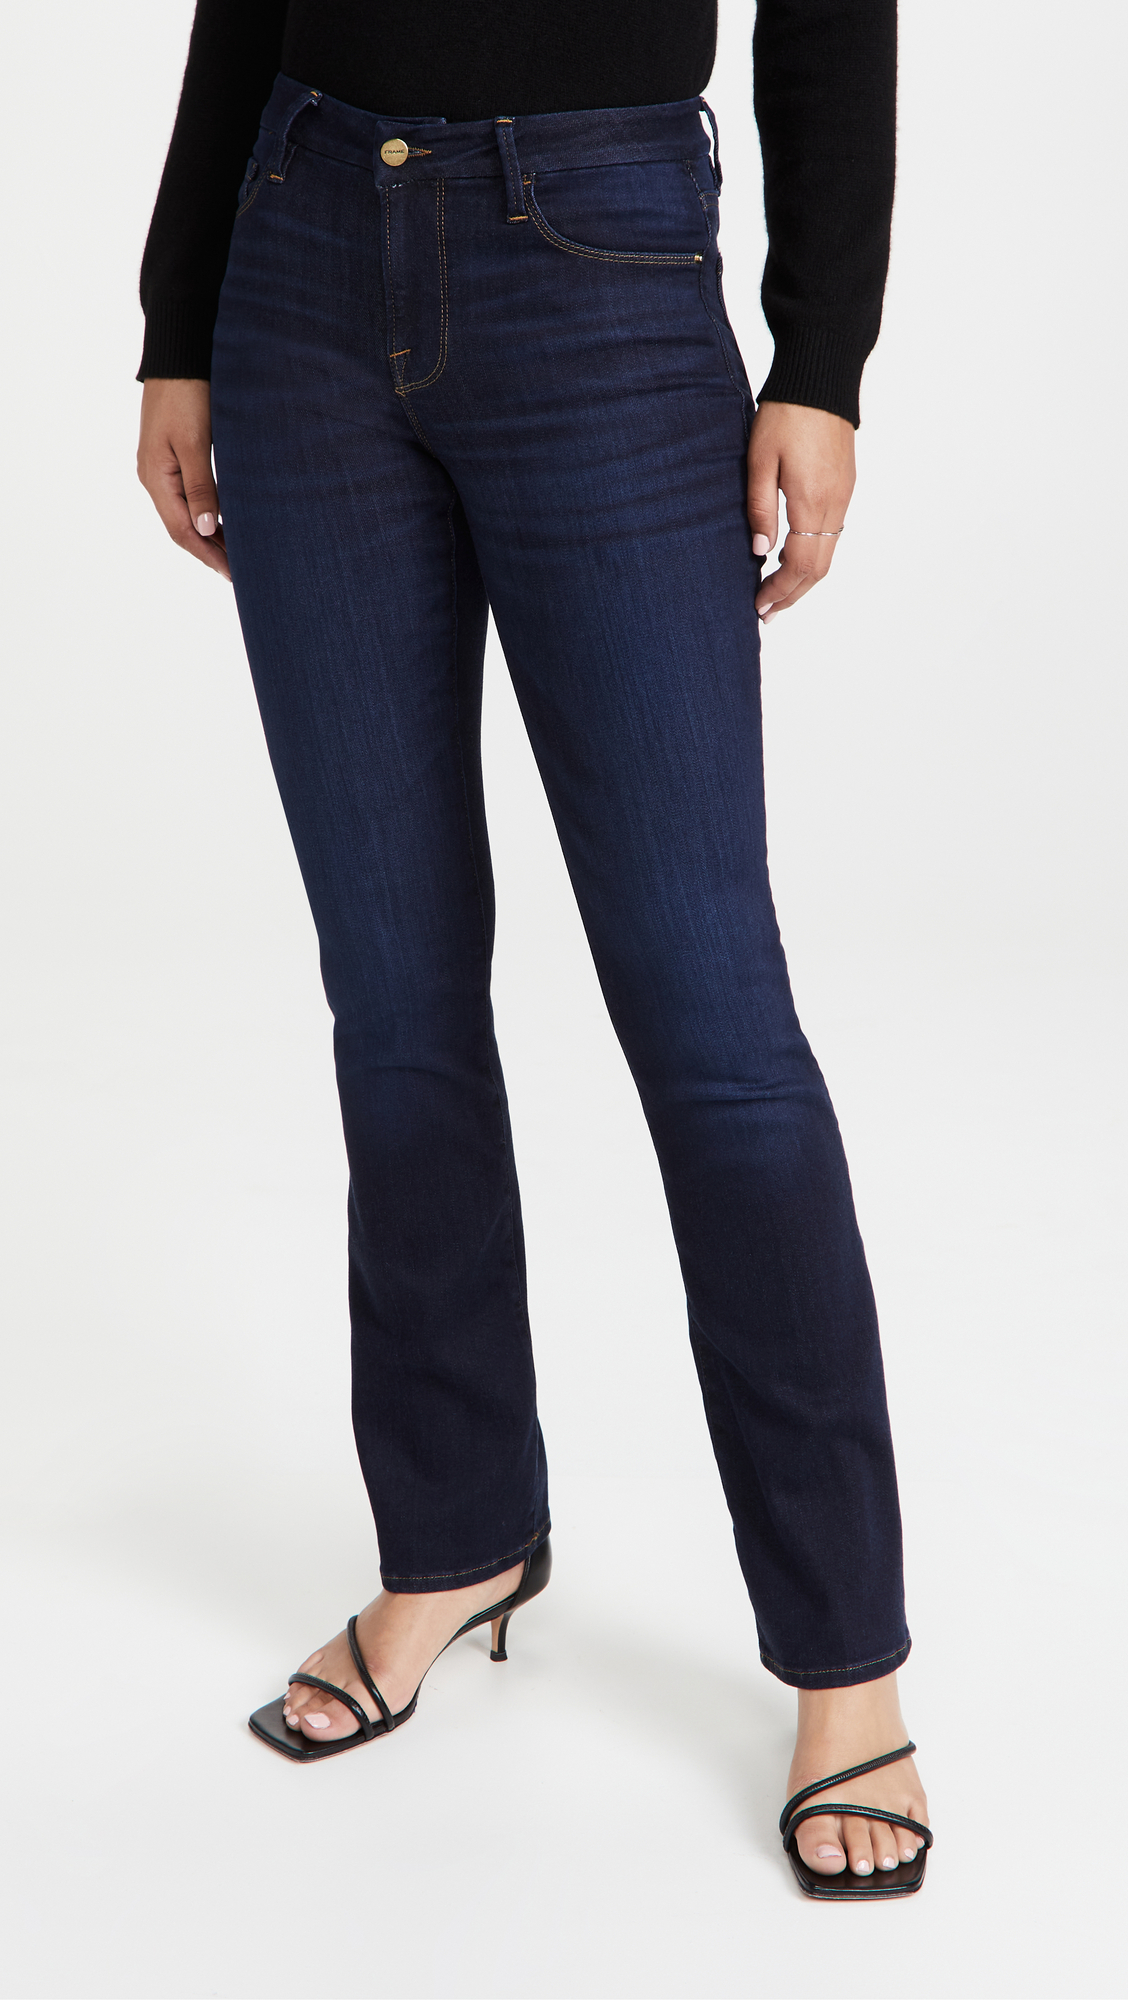 The 27 Best Dark Jeans for Women in Every Popular Cut | Who What Wear